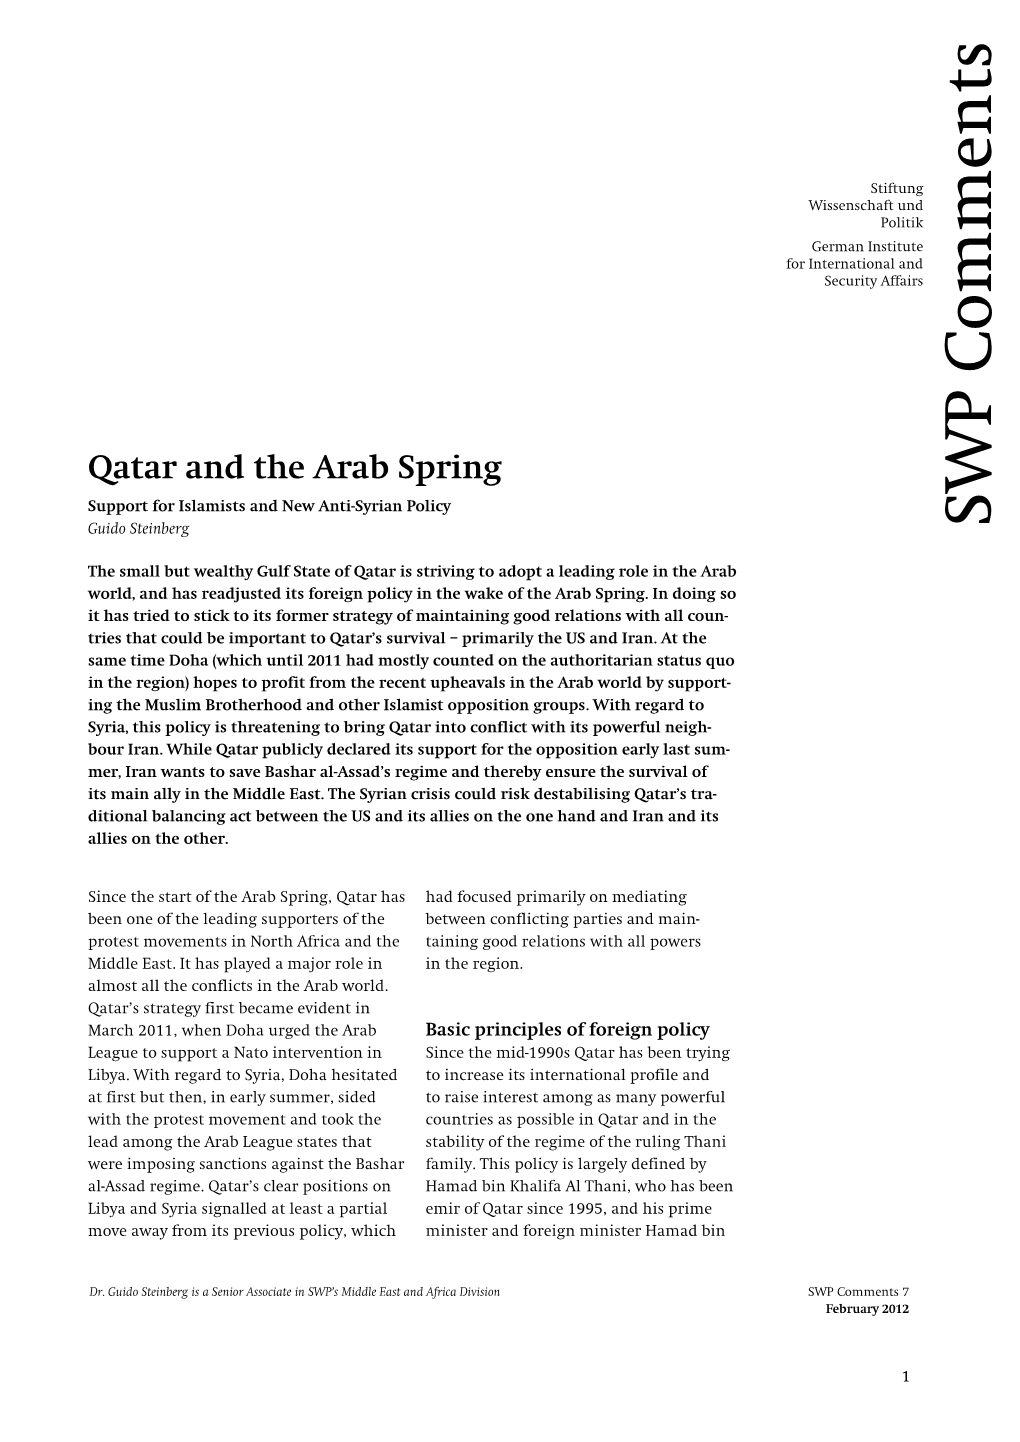 Qatar and the Arab Spring Support for Islamists and New Anti-Syrian Policy